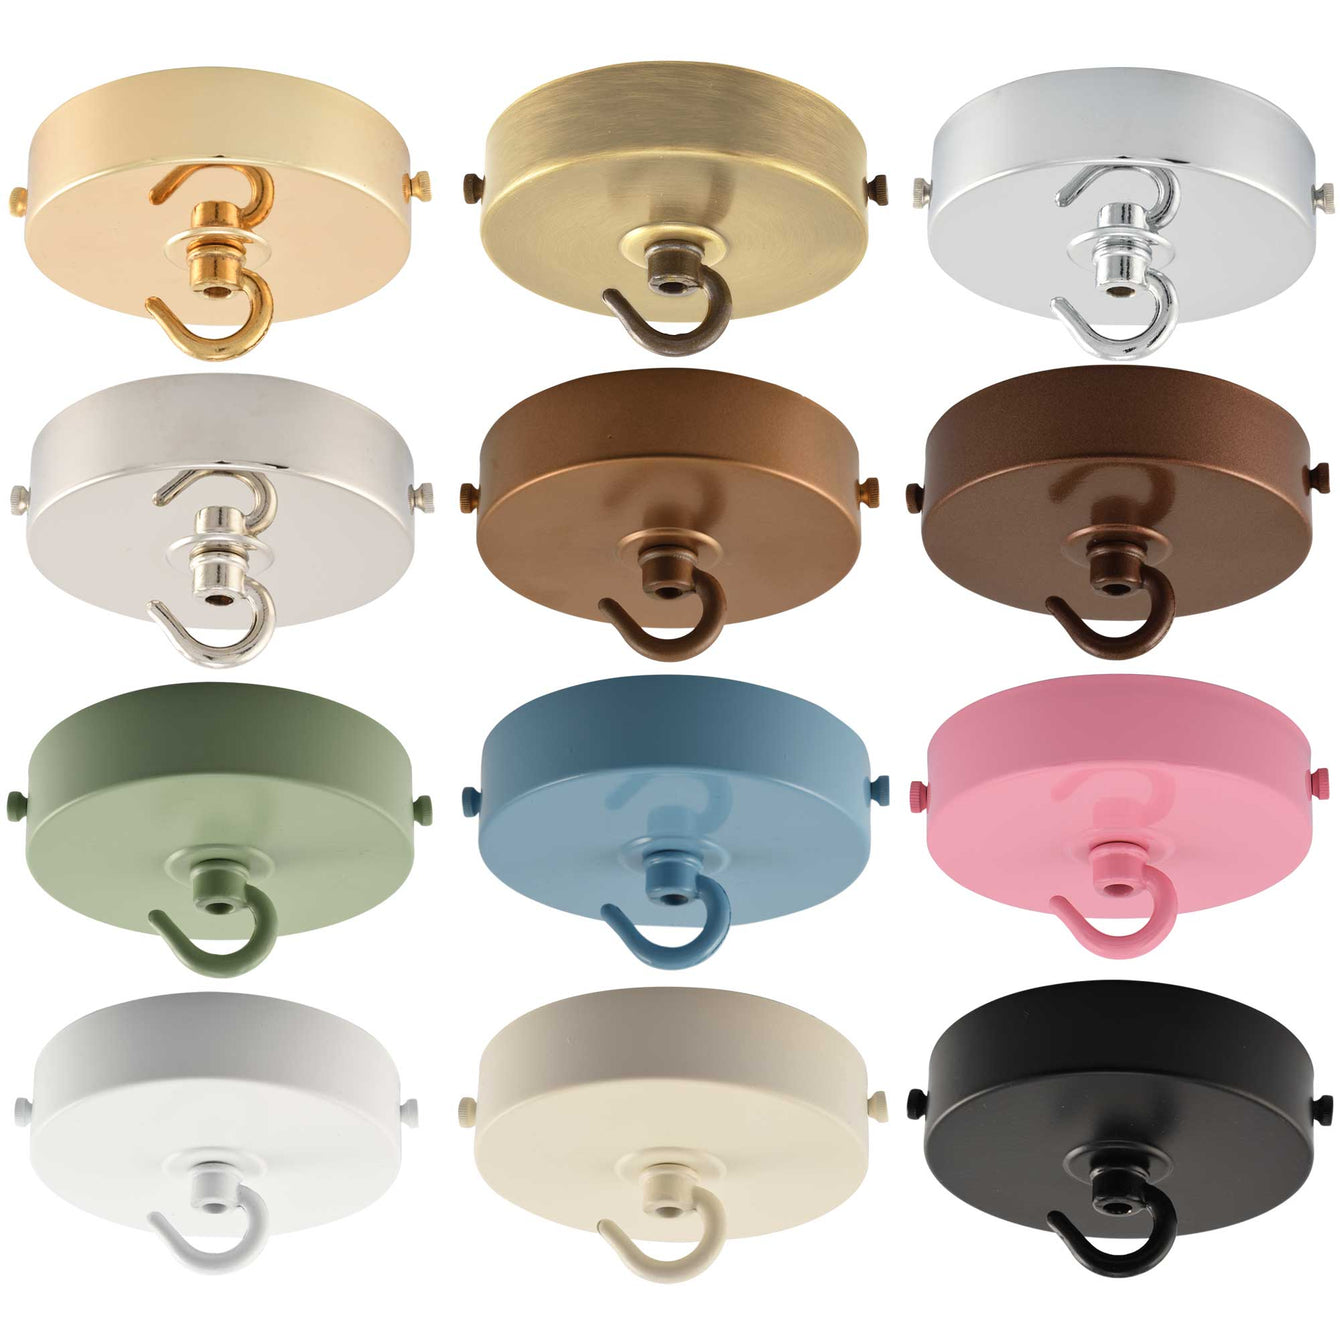 ElekTek 100mm Diameter Flat Top Ceiling Rose with Strap Bracket and Hook Metallic Finishes Powder Coated Colours Brass